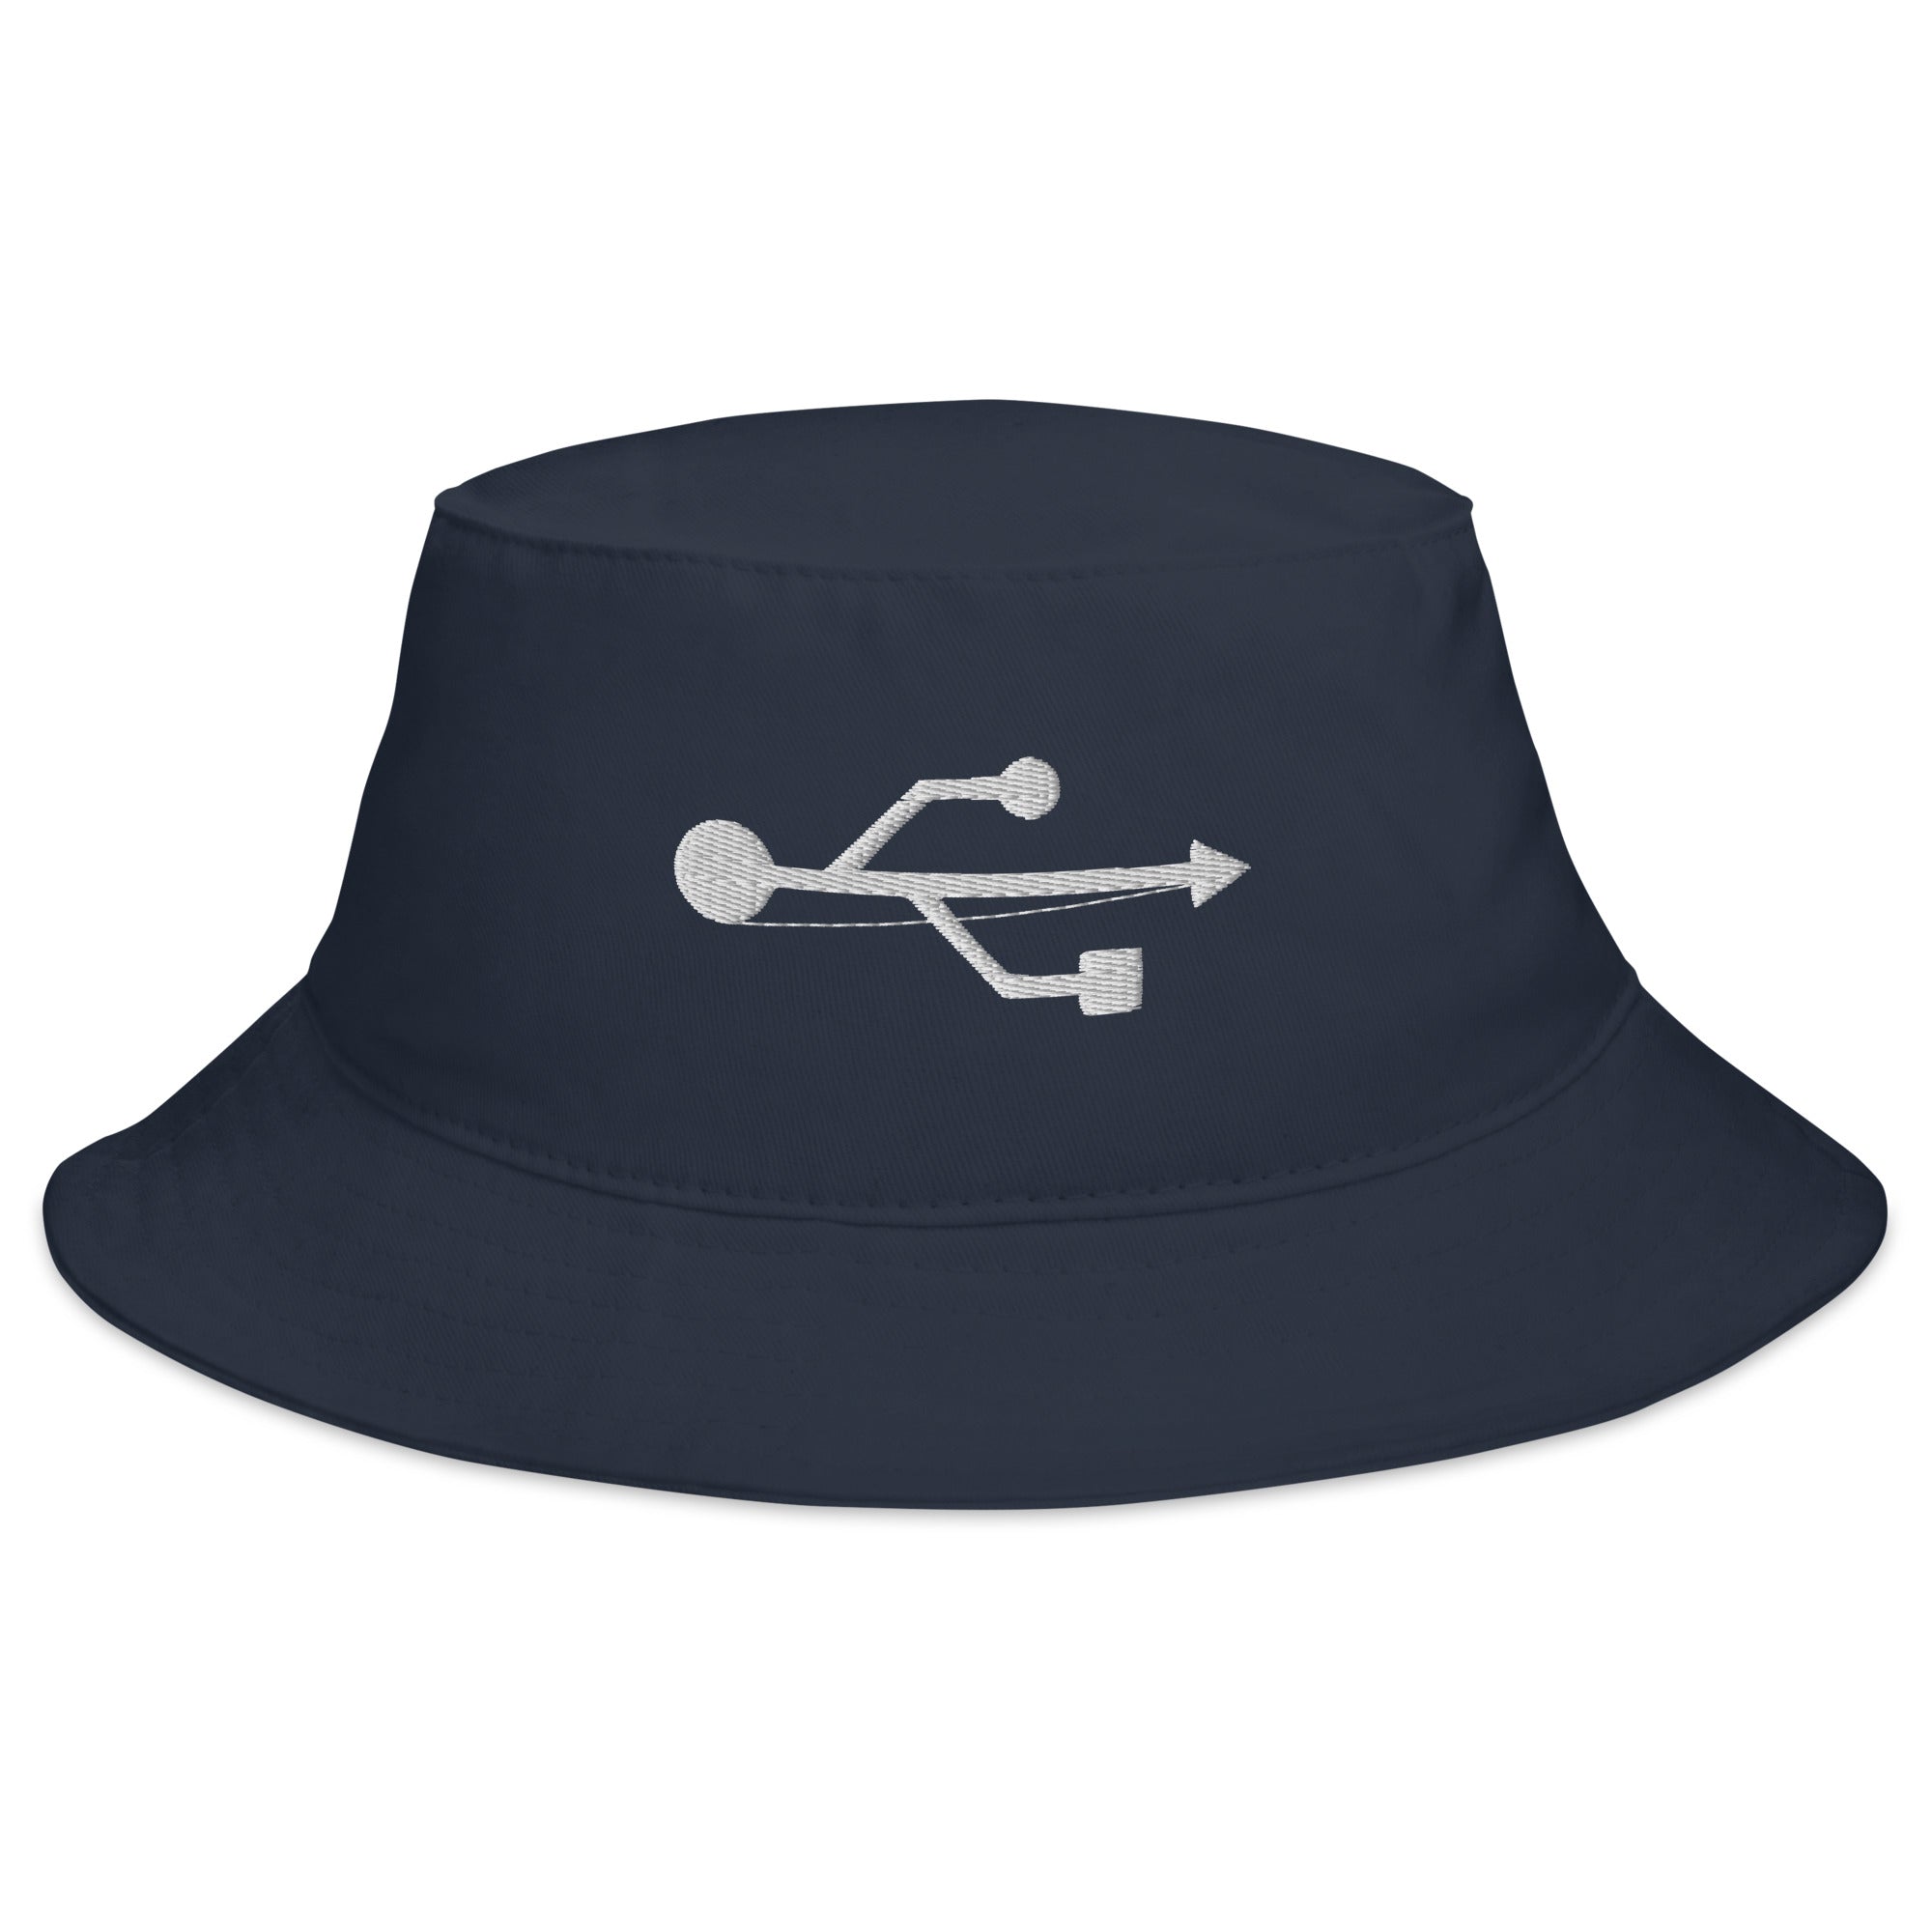 USB Symbol Embroidered Bucket Hat Universal Serial Bus